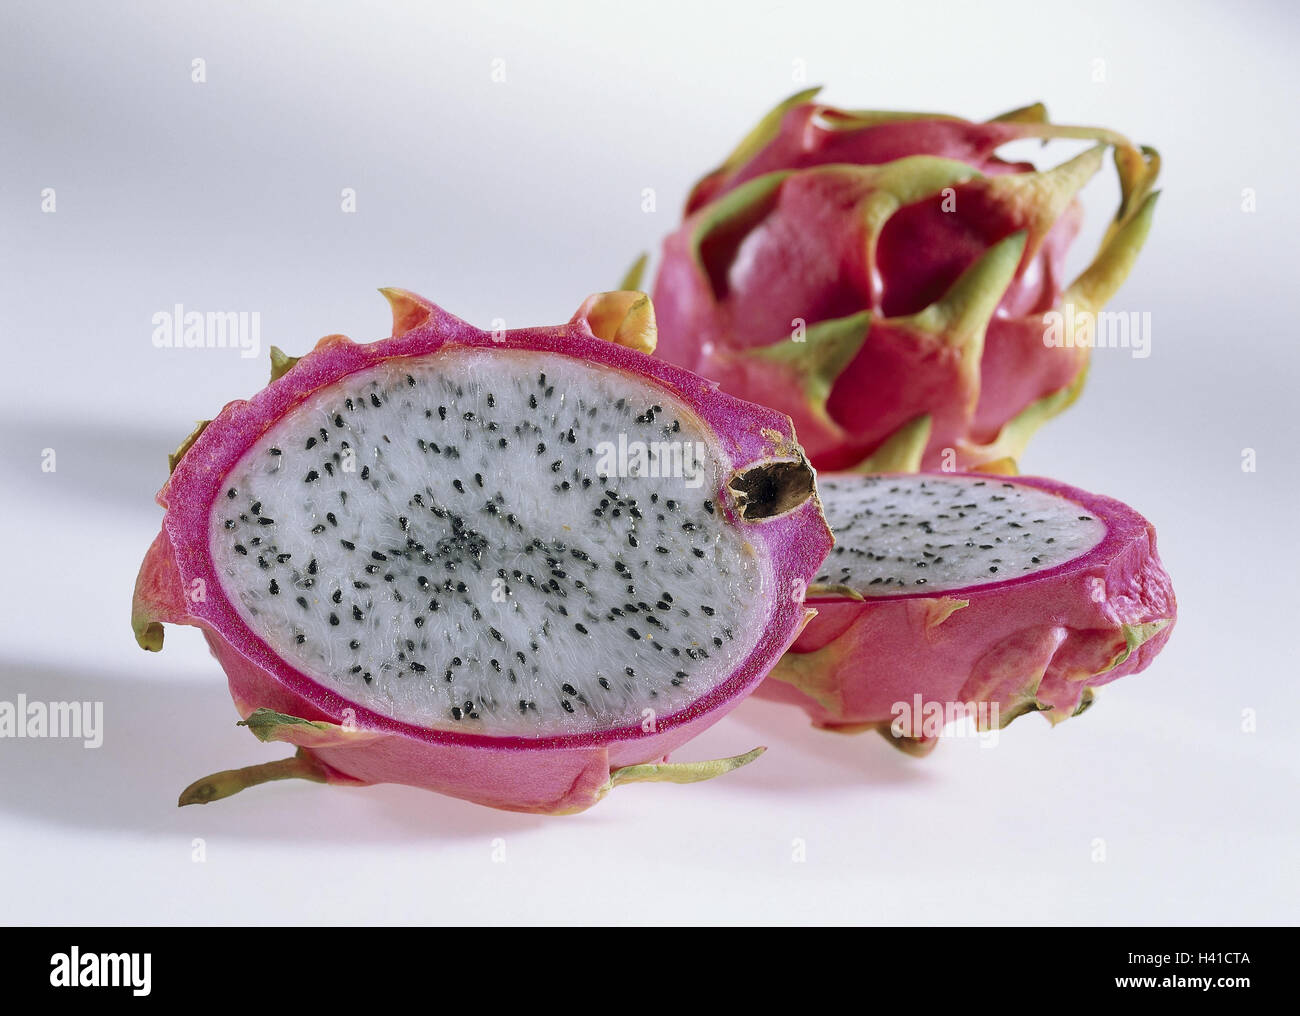 Red Pitahaya, completely, cut open, Still life, fruits, exotic, tropical, tropical fruits, Pitaya, Hylocereus triangularis, cactus plants, cactus fruits, nutrition, healthy, rich in vitamins, vitamins, prickly pear, Opuntia ficus india, flesh Stock Photo